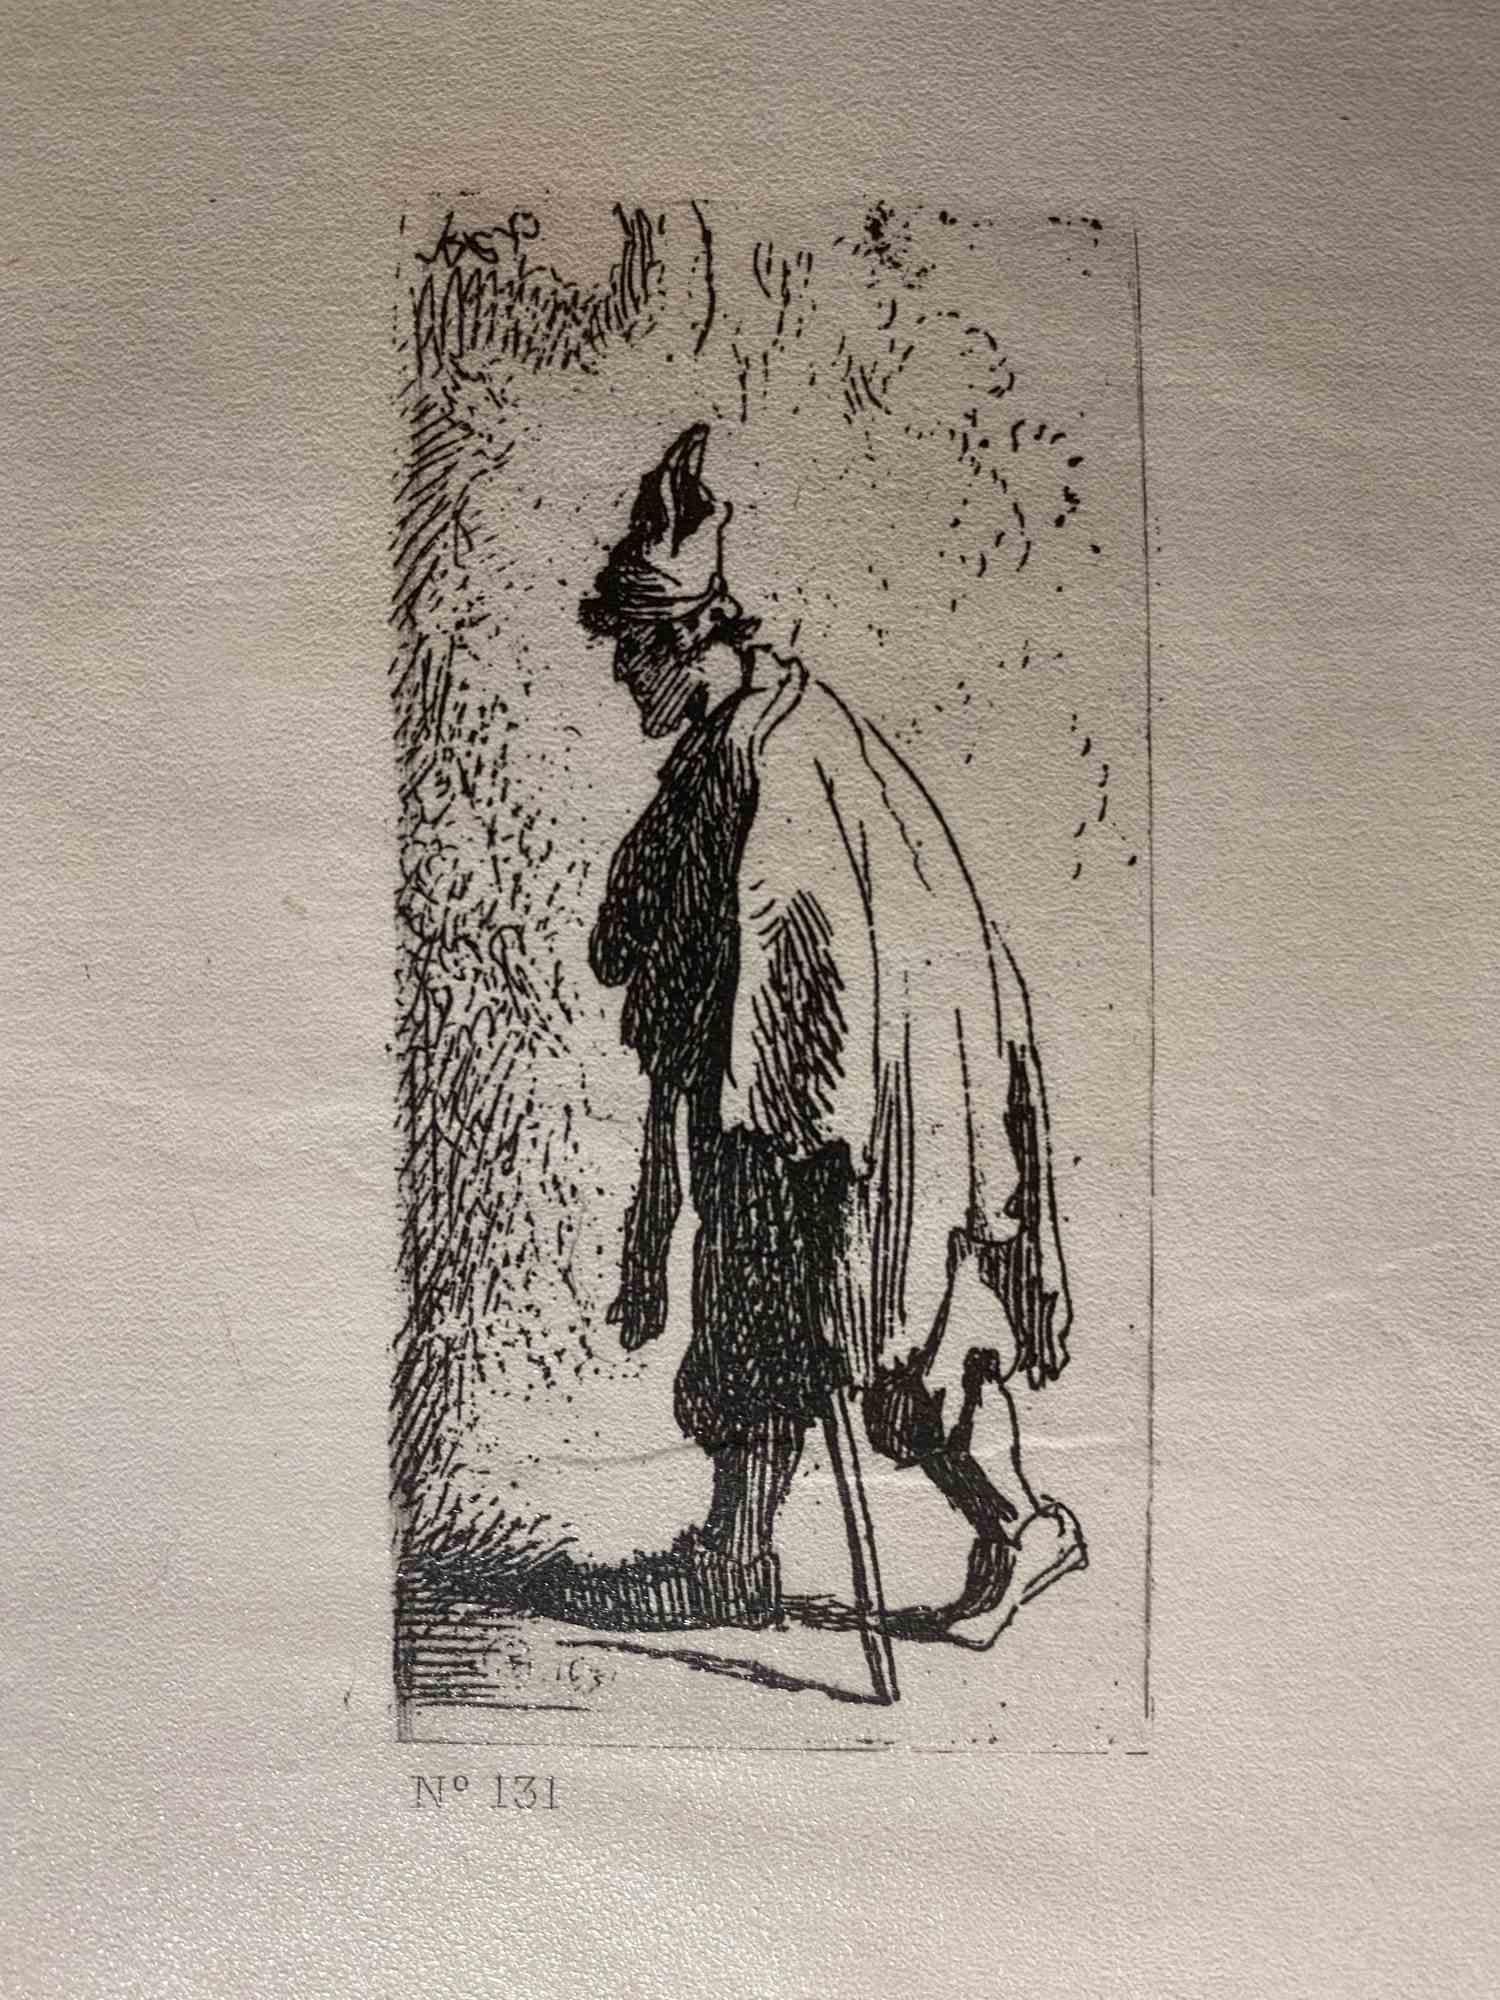 Charles Amand Durand Portrait Print - Beggar with a Stick - Engraving after Rembrandt - 19th Century